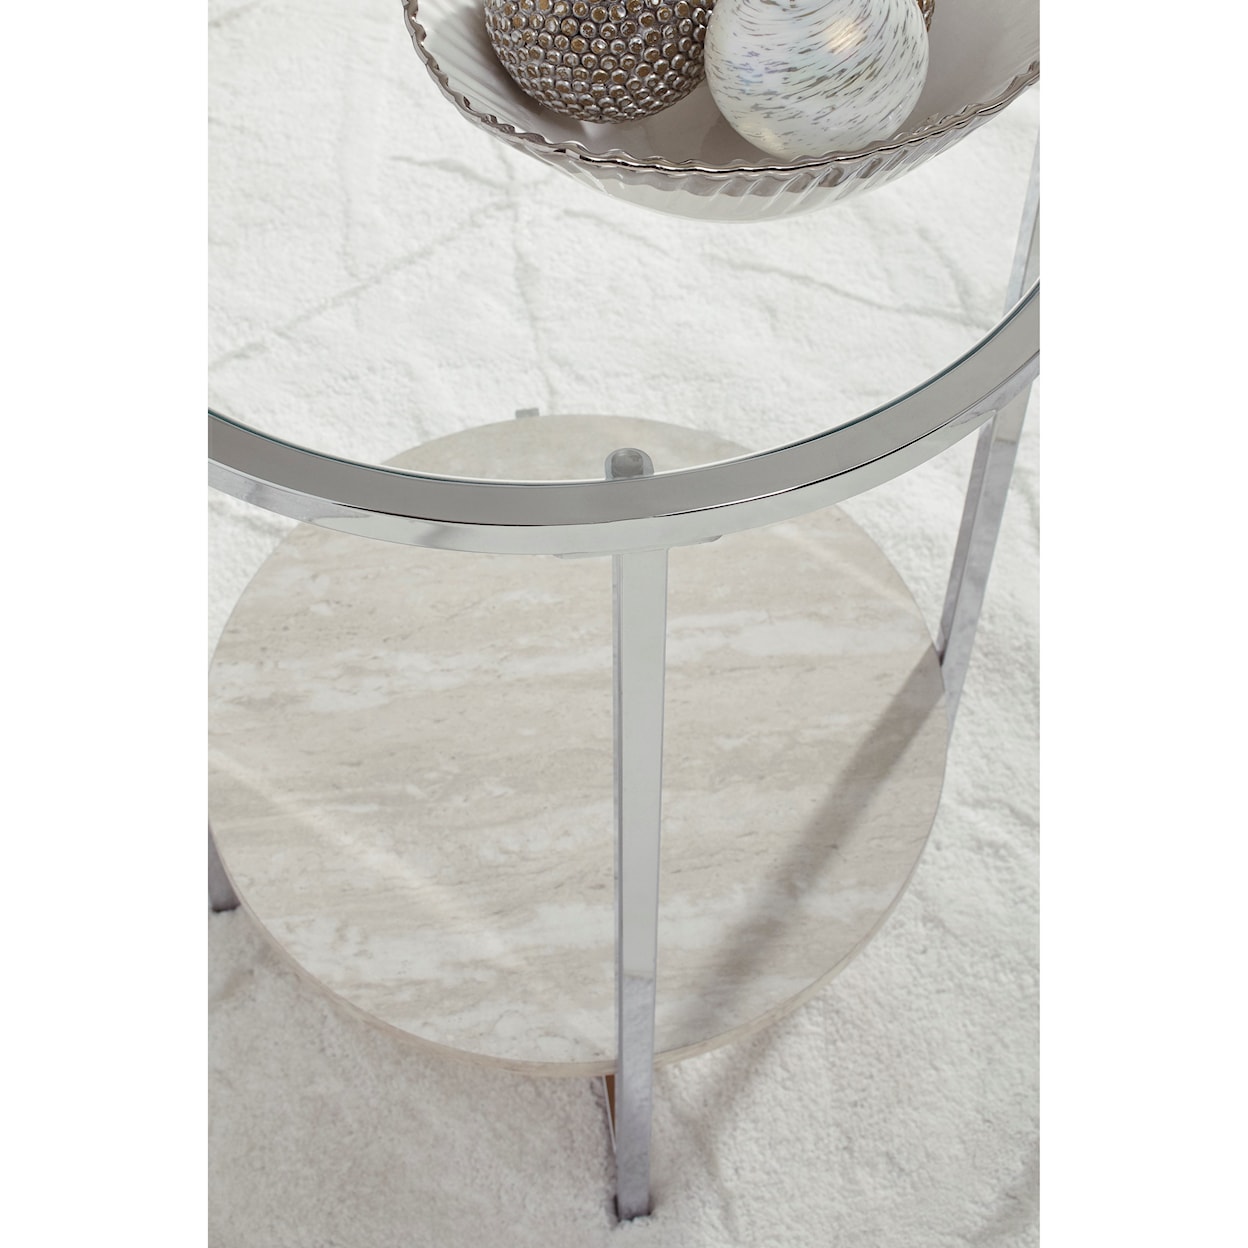 Signature Design by Ashley Bodalli Round End Table